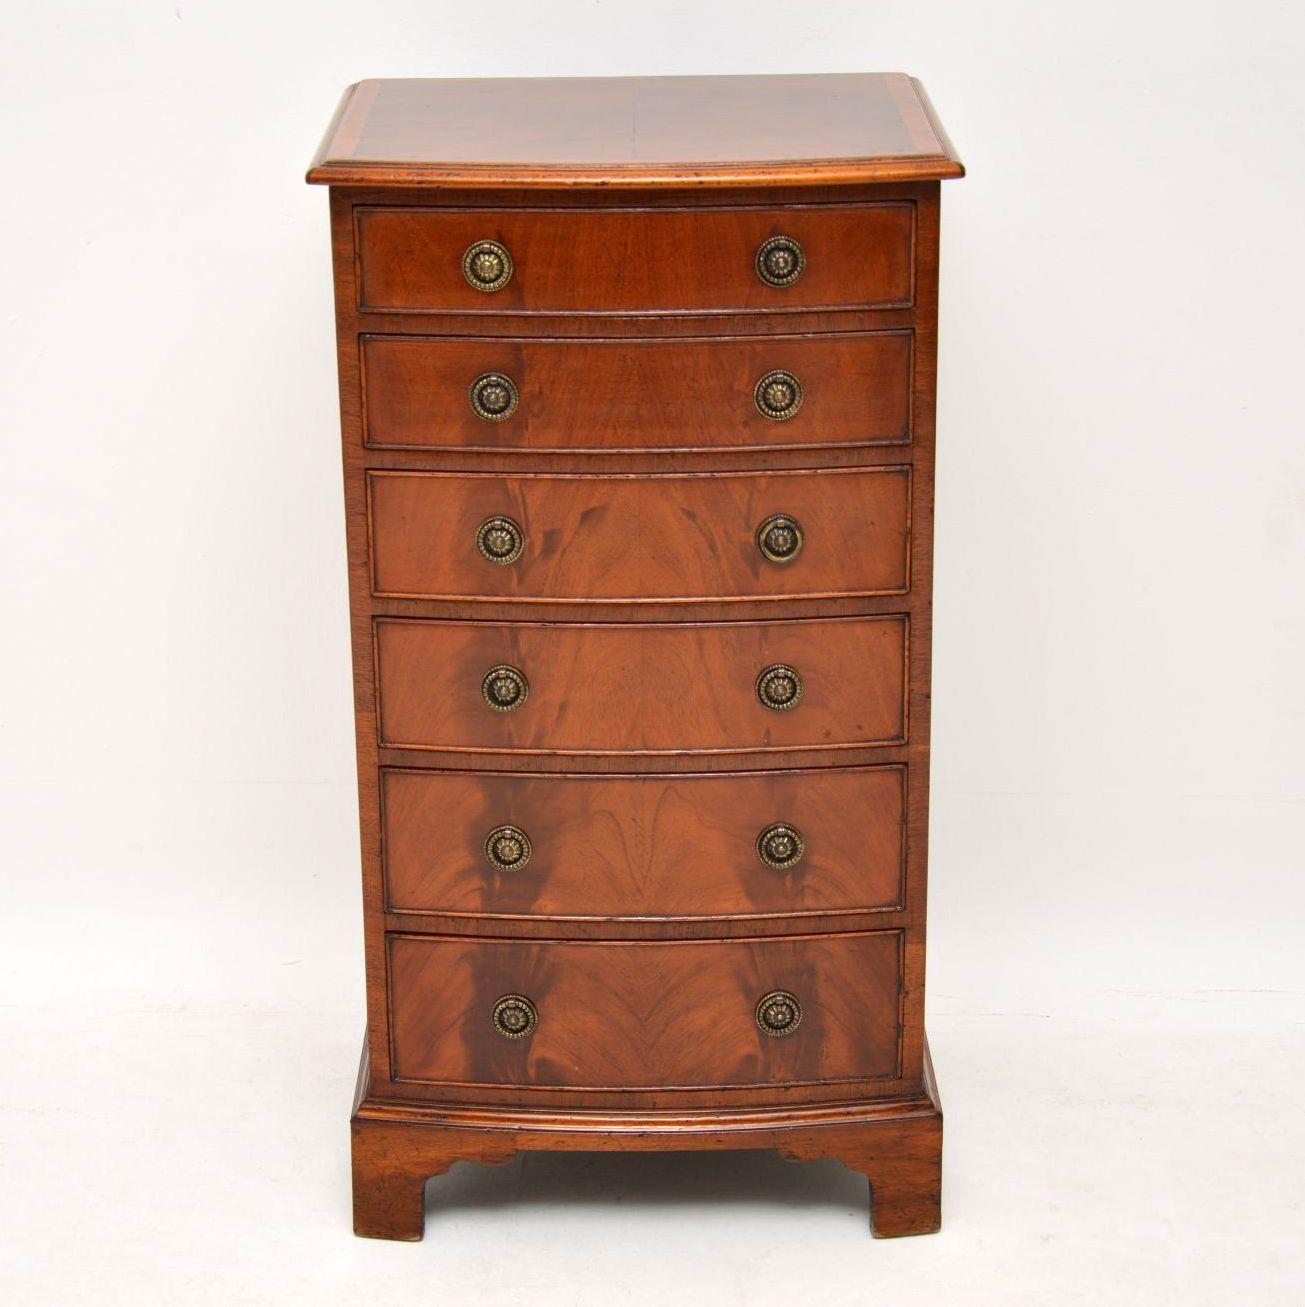 Fine quality small antique mahogany bow fronted chest of drawers in good original condition and with plenty of character. This chest dates from circa 1900s-1920s period. It has nice slim proportions, with six drawers all graduated in depth with